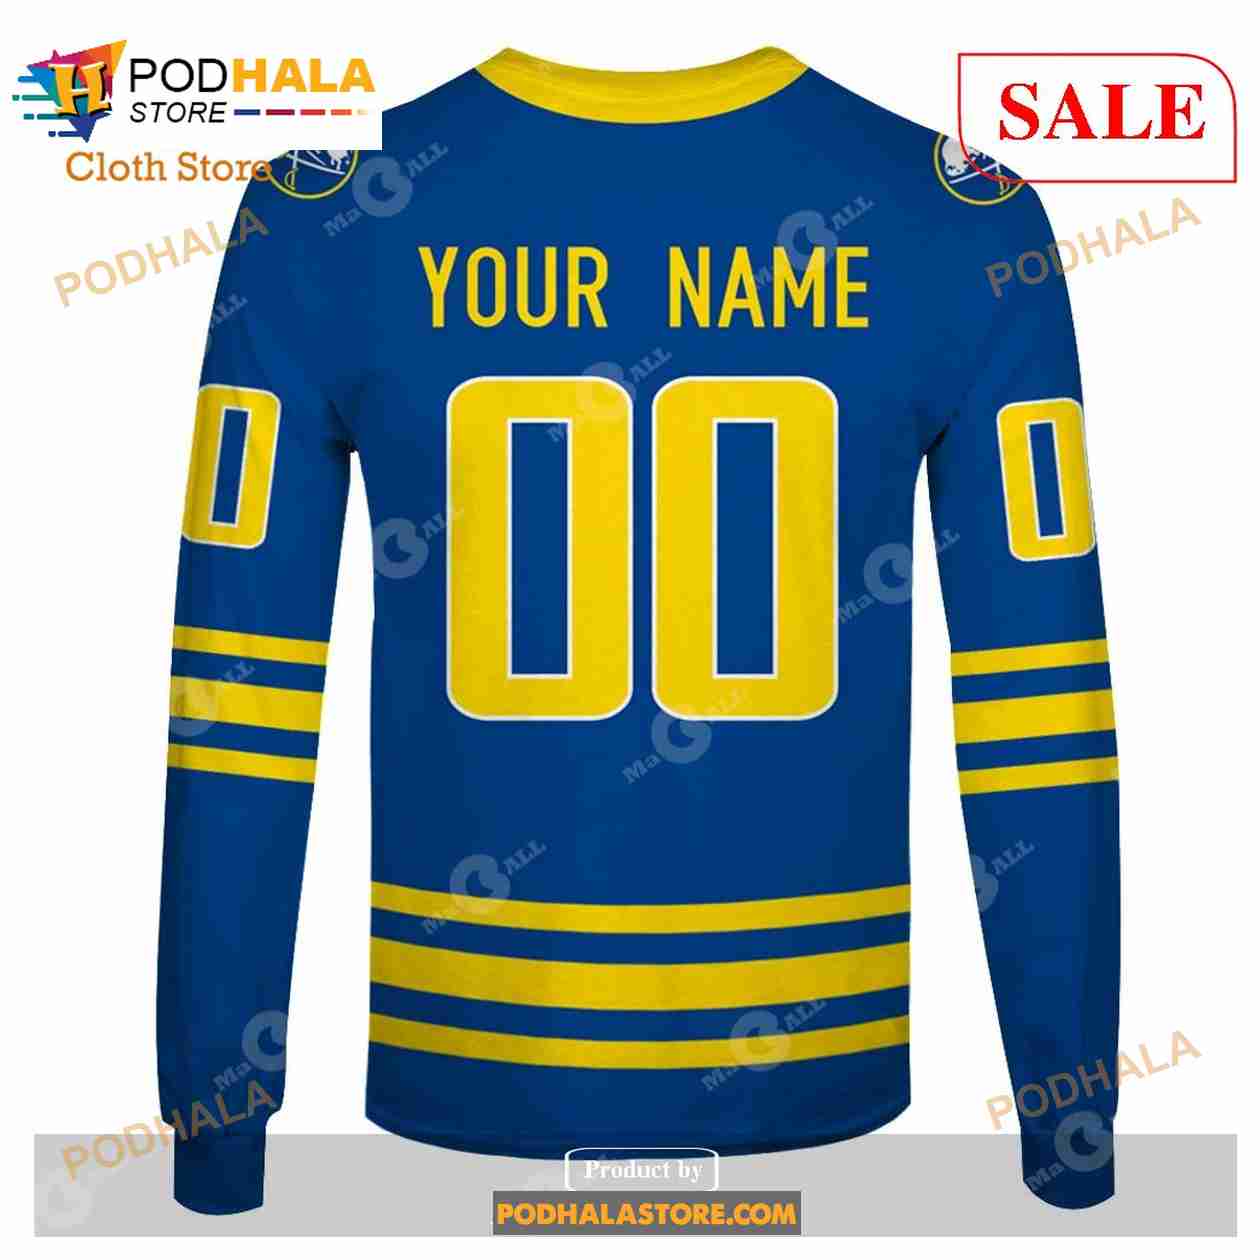 RARE Authentic BUFFALO SABRES Blue REVERSE RETRO Youth/Boys JERSEY HOODY XL  l